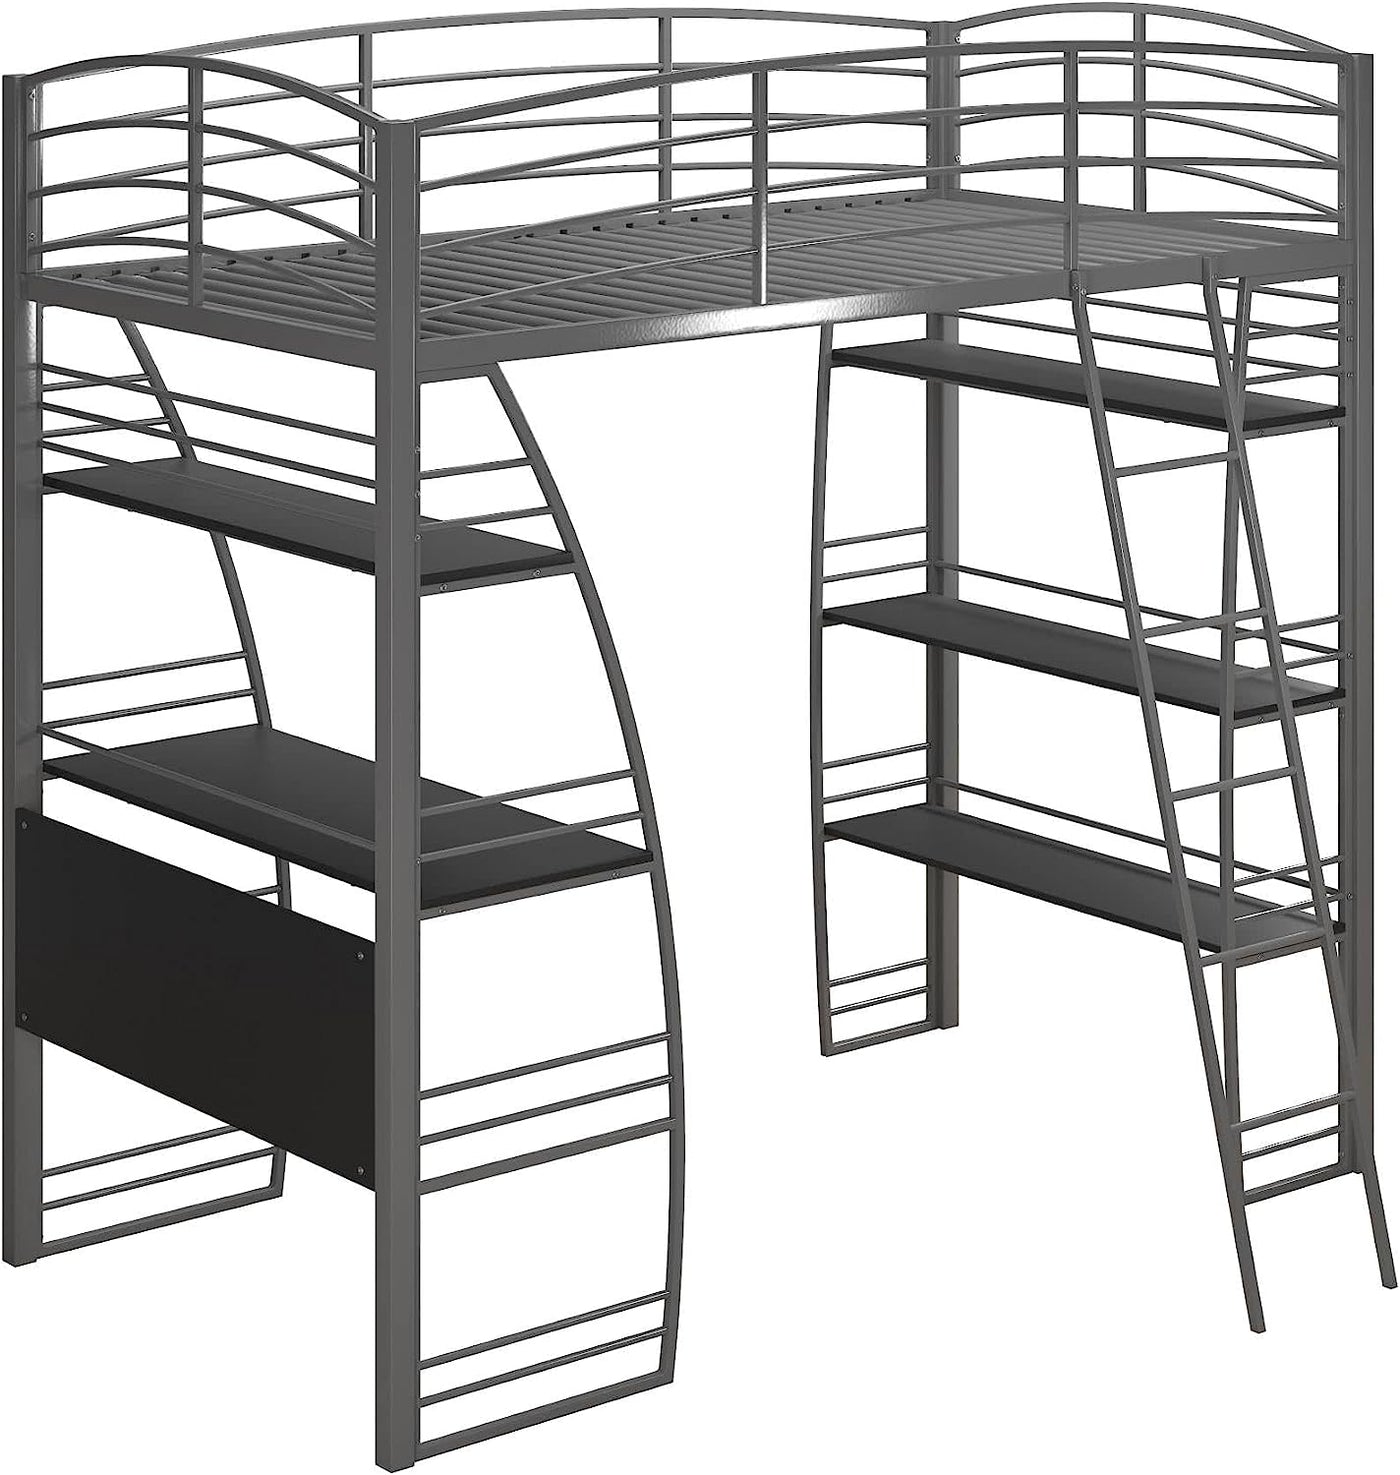 DHP Studio Loft Bunk Bed Over Desk and Bookcase with Metal Frame - Twin (Gray) - $235